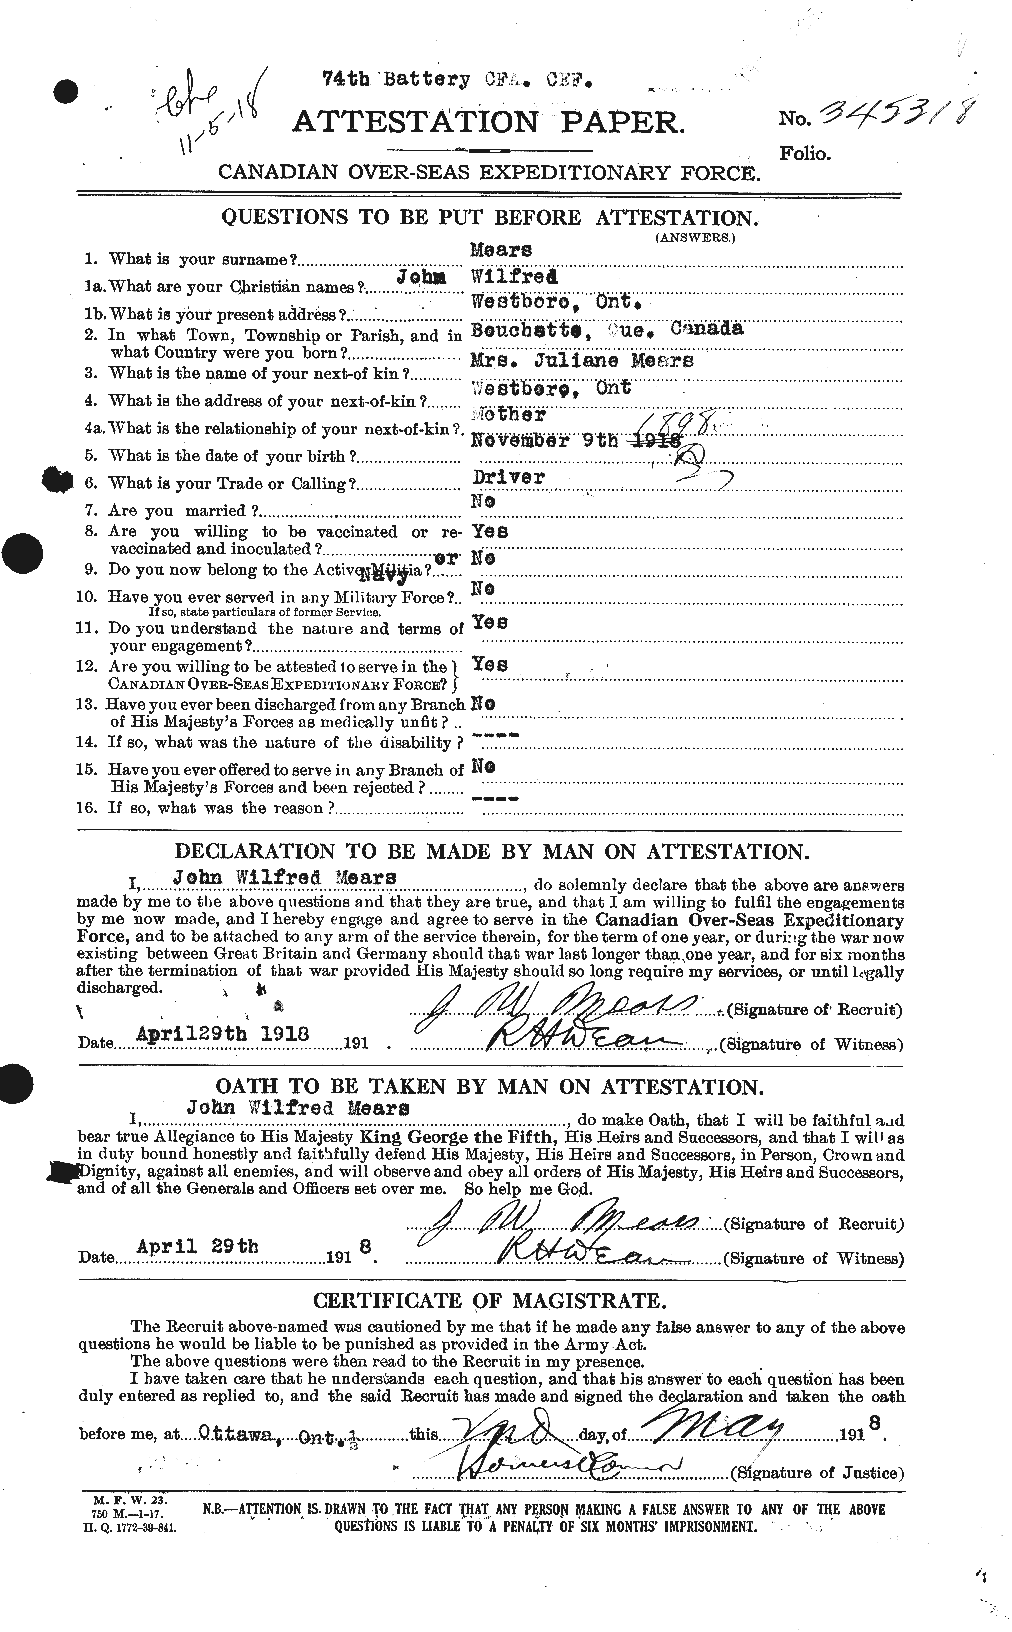 Personnel Records of the First World War - CEF 489703a